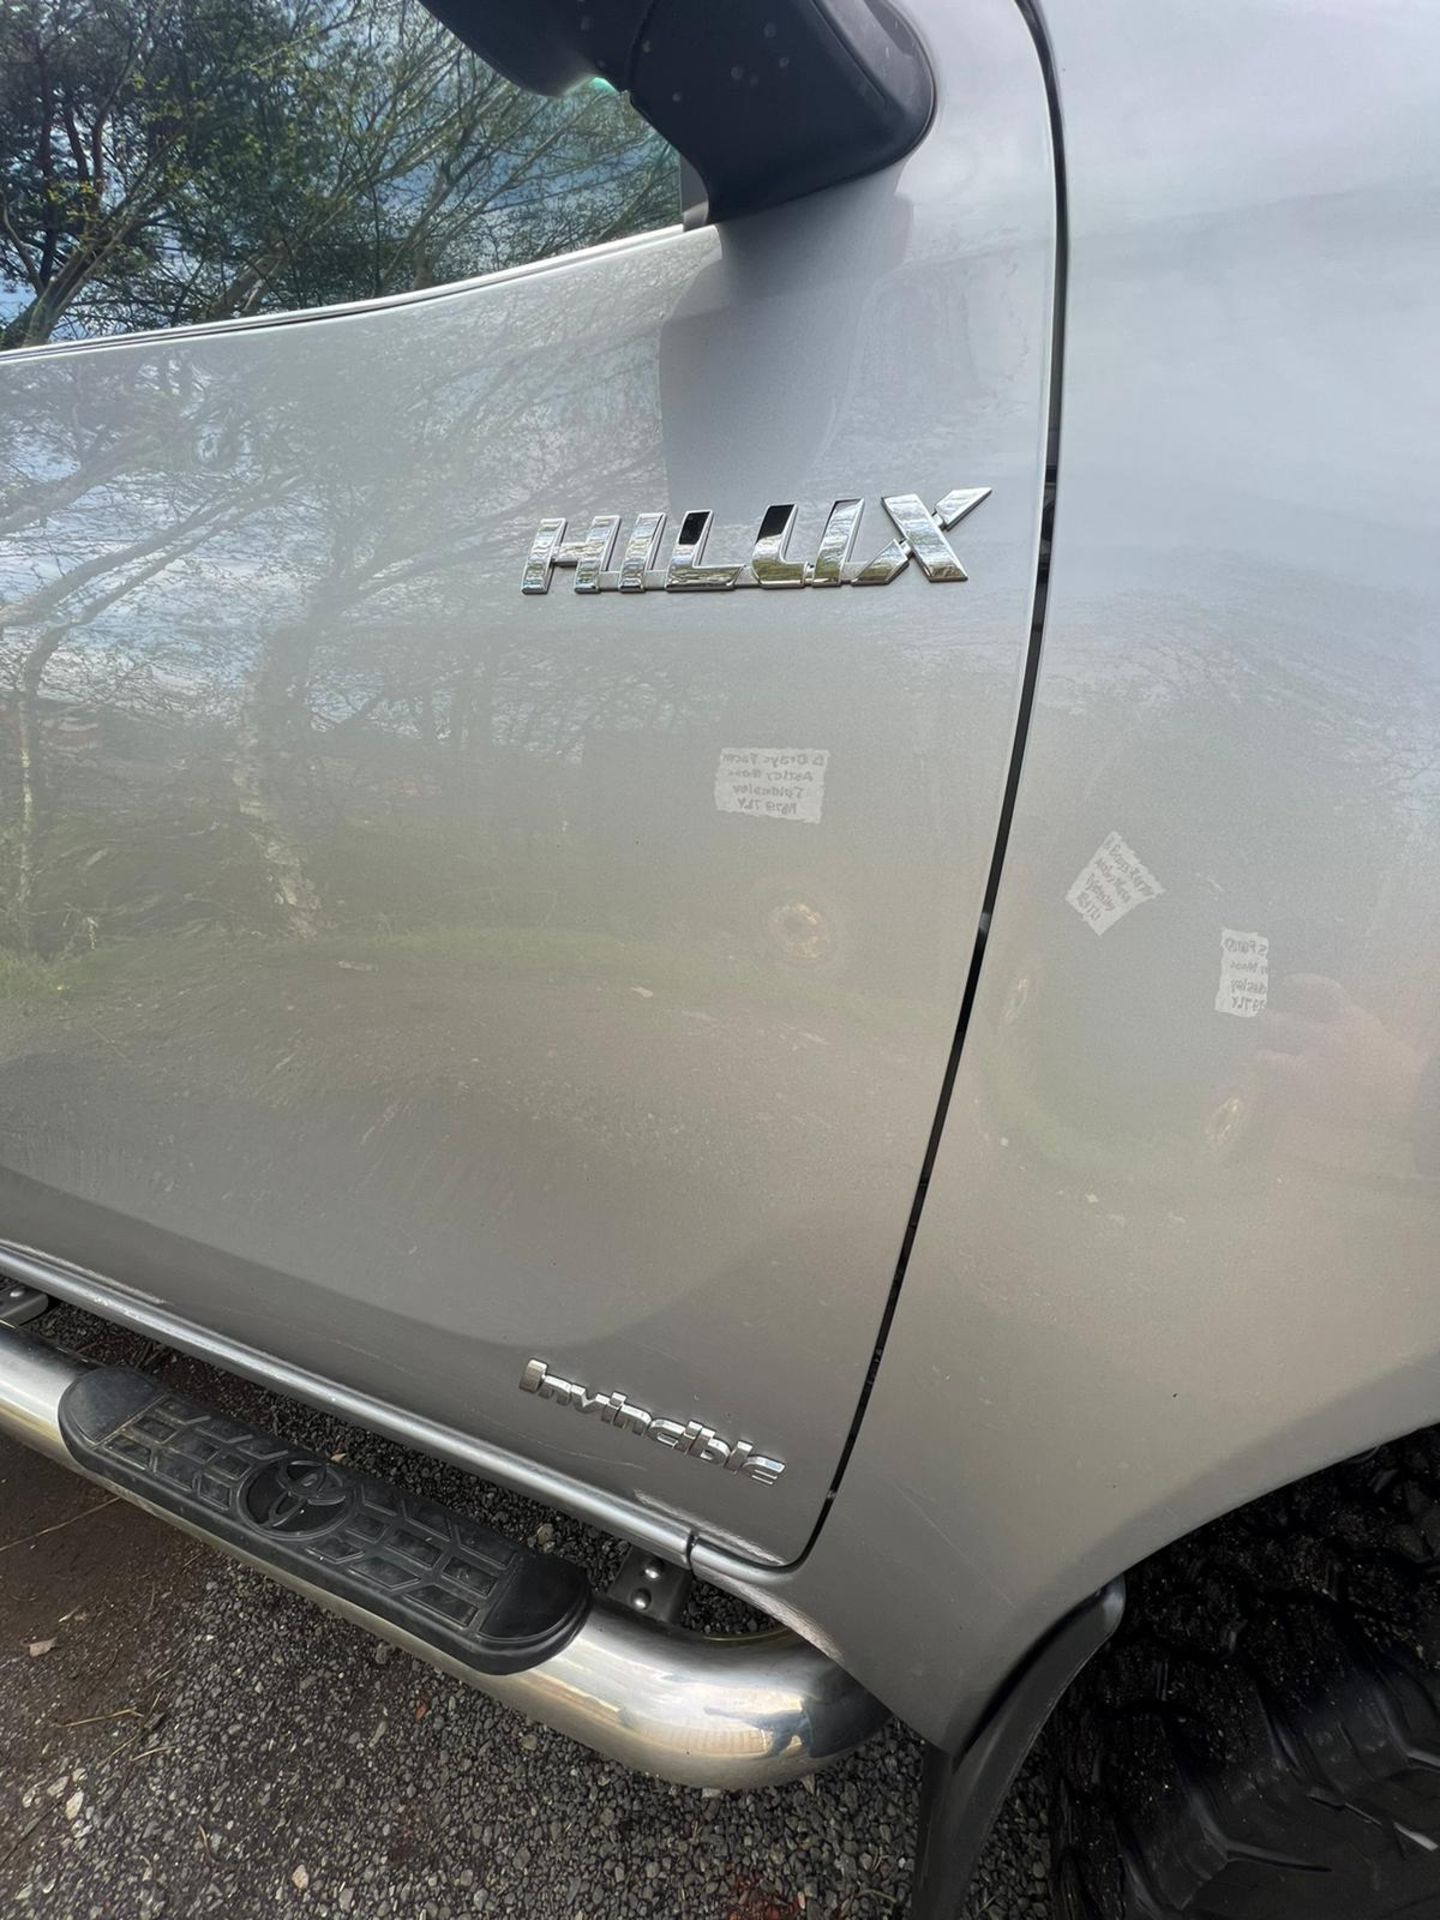 TOYOTA HILUX INVINCIBLE - Image 15 of 25